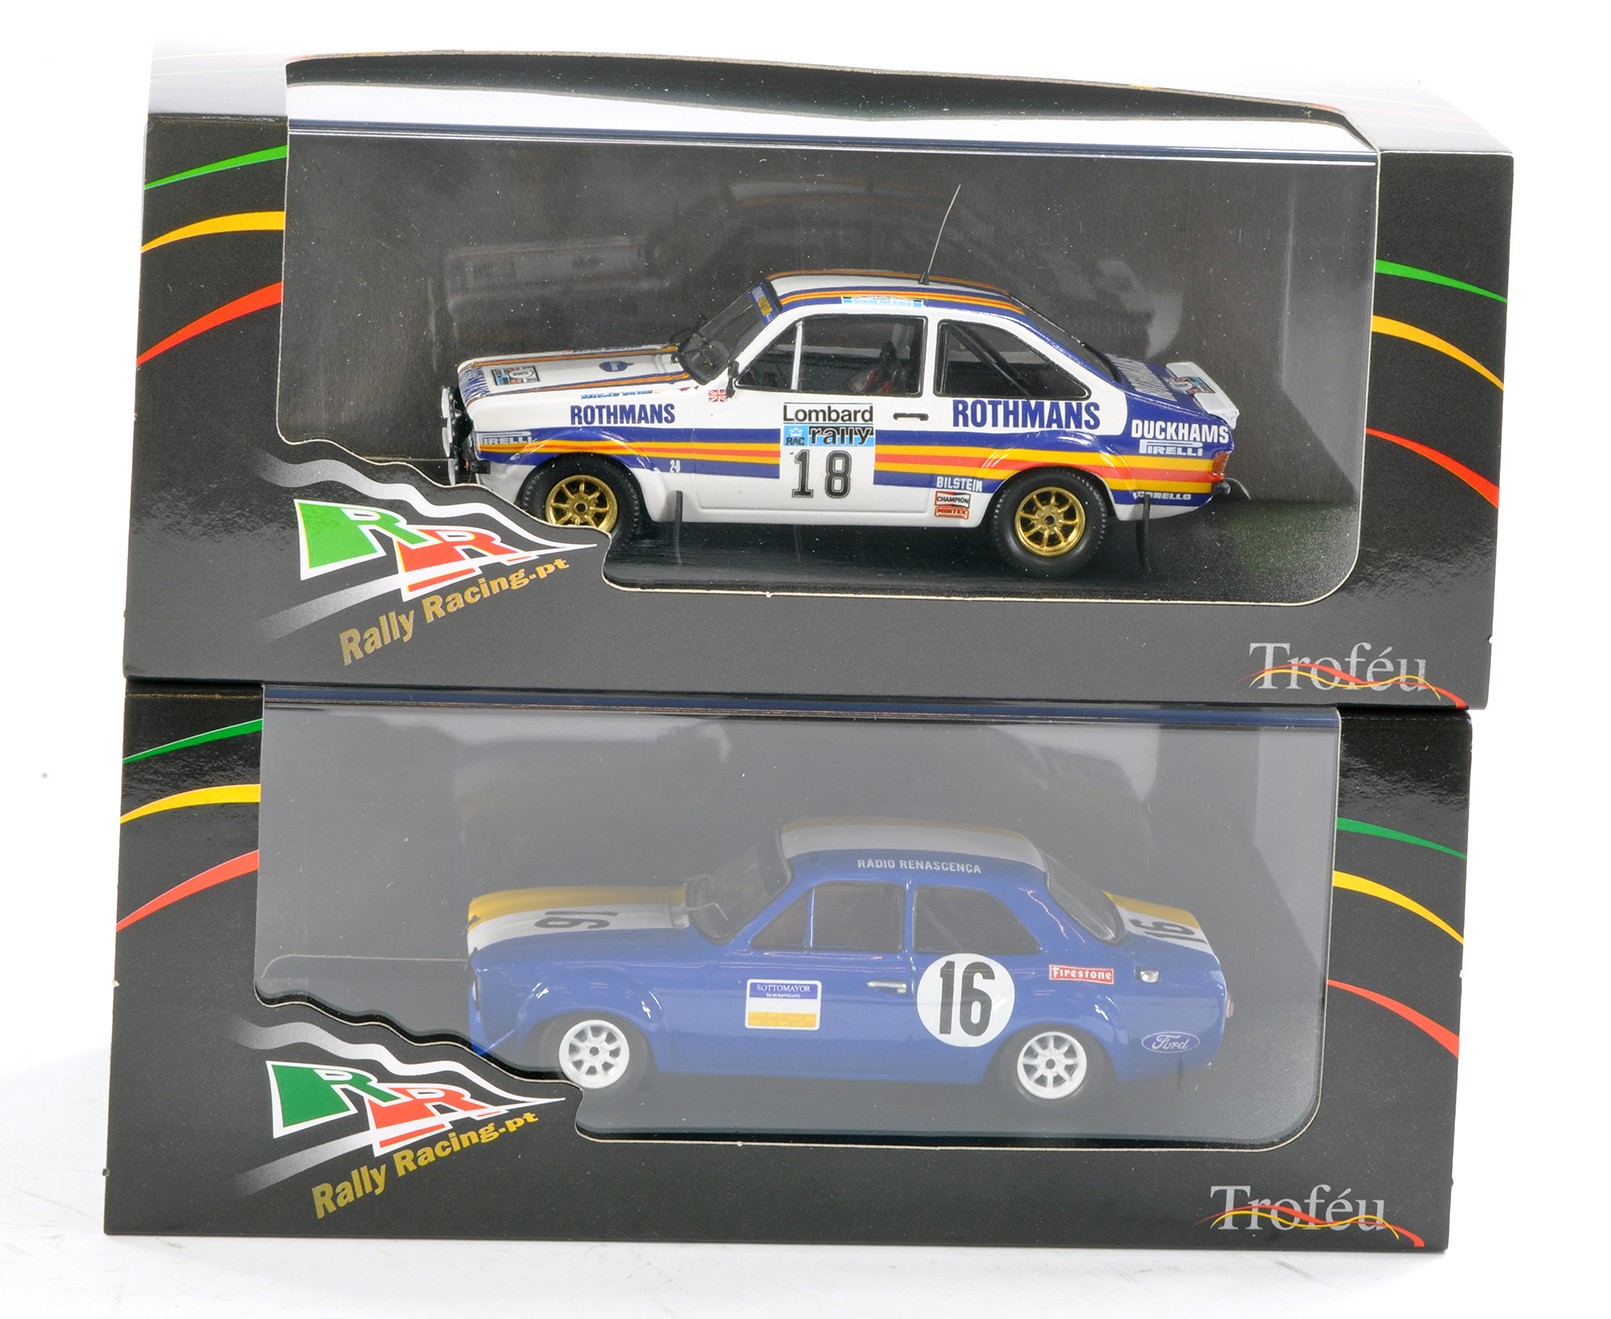 Trofeu 1/43 scale duo of Ford Escort MK1 and MK2 issues, both limited to 150 pcs only. Not removed